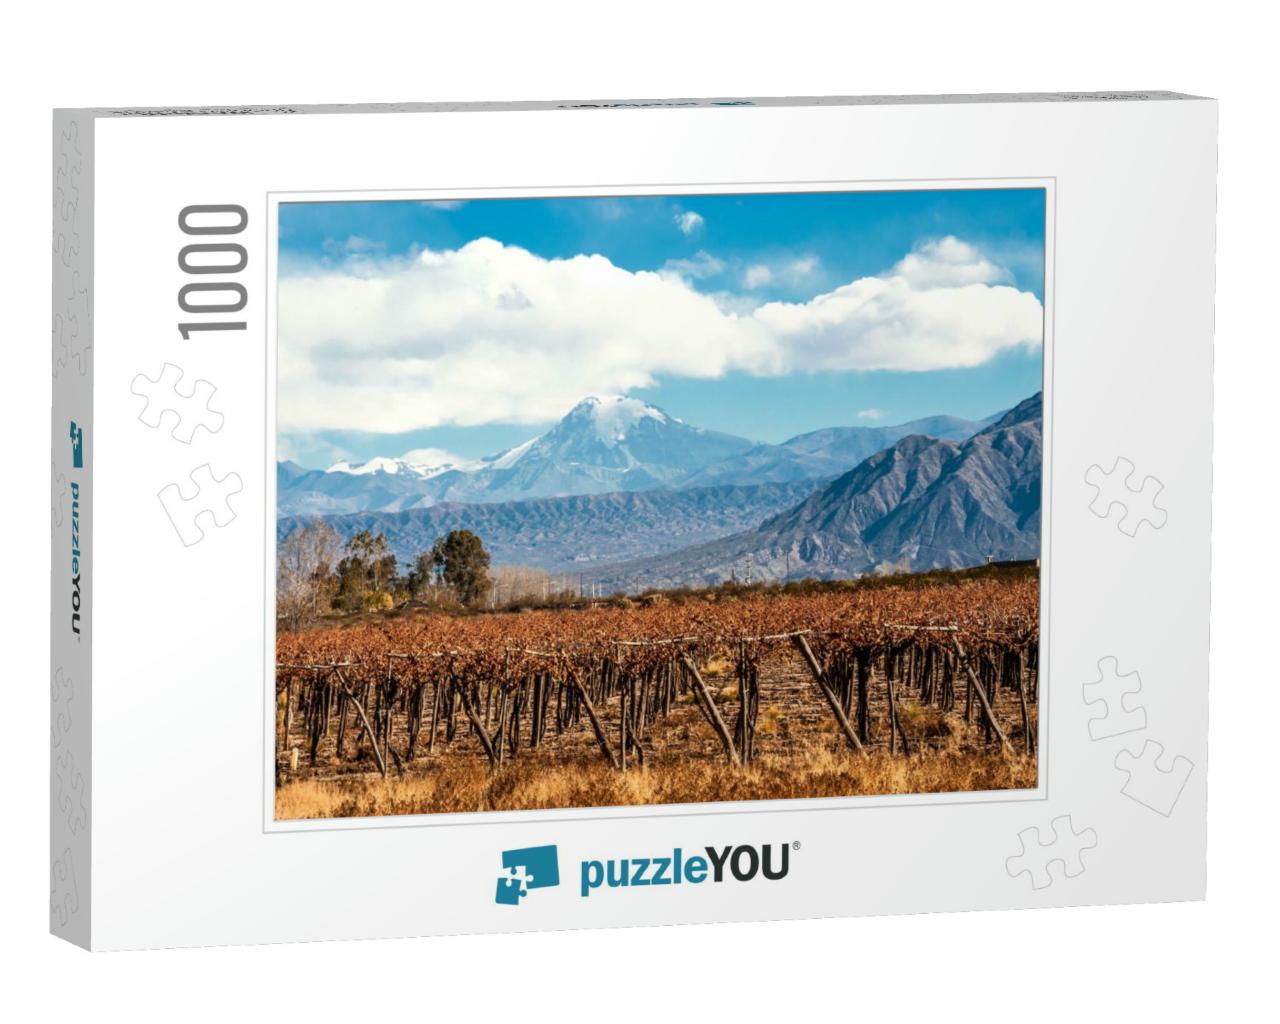 Volcano Aconcagua & Vineyard. Aconcagua is the Highest Mo... Jigsaw Puzzle with 1000 pieces